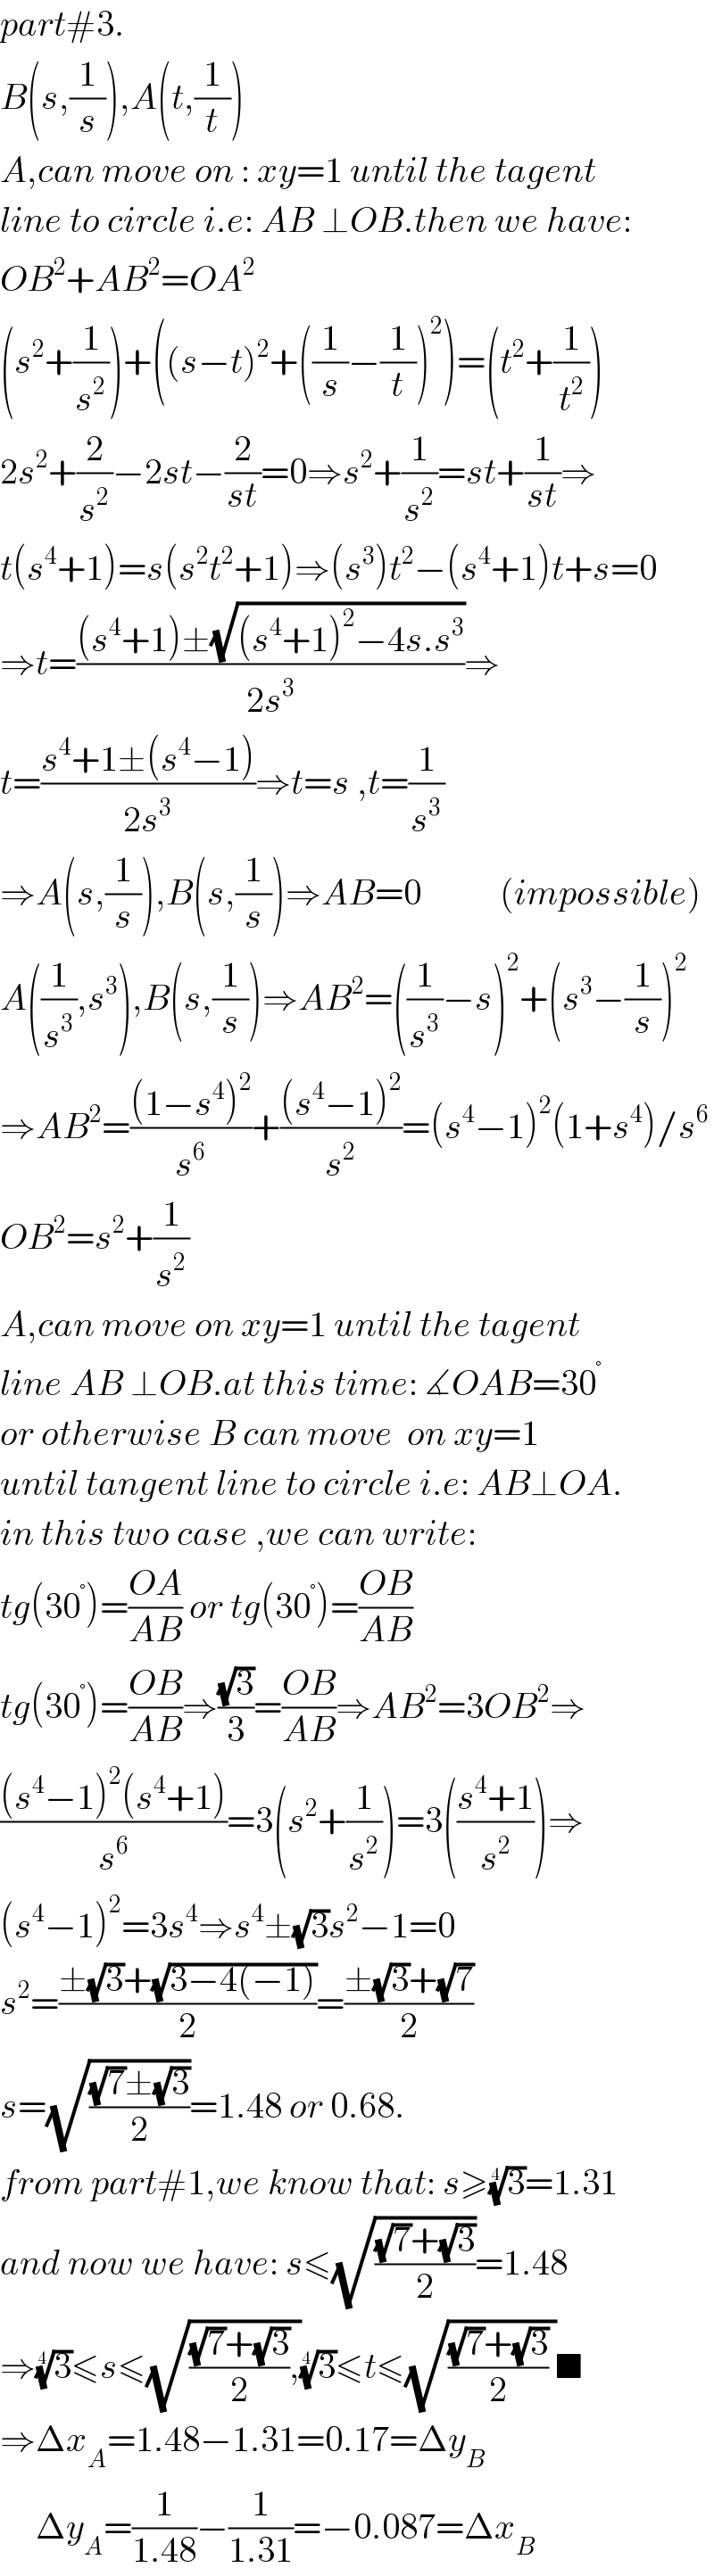 part#3.  B(s,(1/s)),A(t,(1/t))  A,can move on : xy=1 until the tagent  line to circle i.e: AB ⊥OB.then we have:  OB^2 +AB^2 =OA^2   (s^2 +(1/s^2 ))+((s−t)^2 +((1/s)−(1/t))^2 )=(t^2 +(1/t^2 ))  2s^2 +(2/s^2 )−2st−(2/(st))=0⇒s^2 +(1/s^2 )=st+(1/(st))⇒  t(s^4 +1)=s(s^2 t^2 +1)⇒(s^3 )t^2 −(s^4 +1)t+s=0  ⇒t=(((s^4 +1)±(√((s^4 +1)^2 −4s.s^3 )))/(2s^3 ))⇒  t=((s^4 +1±(s^4 −1))/(2s^3 ))⇒t=s ,t=(1/s^3 )  ⇒A(s,(1/s)),B(s,(1/s))⇒AB=0           (impossible)  A((1/s^3 ),s^3 ),B(s,(1/s))⇒AB^2 =((1/s^3 )−s)^2 +(s^3 −(1/s))^2   ⇒AB^2 =(((1−s^4 )^2 )/s^6 )+(((s^4 −1)^2 )/s^2 )=(s^4 −1)^2 (1+s^4 )/s^6   OB^2 =s^2 +(1/s^2 )  A,can move on xy=1 until the tagent  line AB ⊥OB.at this time: ∡OAB=30^°   or otherwise B can move  on xy=1  until tangent line to circle i.e: AB⊥OA.  in this two case ,we can write:  tg(30^° )=((OA)/(AB)) or tg(30^° )=((OB)/(AB))  tg(30^° )=((OB)/(AB))⇒((√3)/3)=((OB)/(AB))⇒AB^2 =3OB^2 ⇒  (((s^4 −1)^2 (s^4 +1))/s^6 )=3(s^2 +(1/s^2 ))=3(((s^4 +1)/s^2 ))⇒  (s^4 −1)^2 =3s^4 ⇒s^4 ±(√3)s^2 −1=0  s^2 =((±(√3)+(√(3−4(−1))))/2)=((±(√3)+(√7))/2)  s=(√(((√7)±(√3))/2))=1.48 or 0.68.  from part#1,we know that: s≥(3)^(1/4) =1.31  and now we have: s≤(√(((√7)+(√3))/2))=1.48  ⇒(3)^(1/4) ≤s≤(√((((√7)+(√3))/2),))(3)^(1/4) ≤t≤(√((((√7)+(√3))/2) ))■  ⇒Δx_A =1.48−1.31=0.17=Δy_B        Δy_A =(1/(1.48))−(1/(1.31))=−0.087=Δx_B   